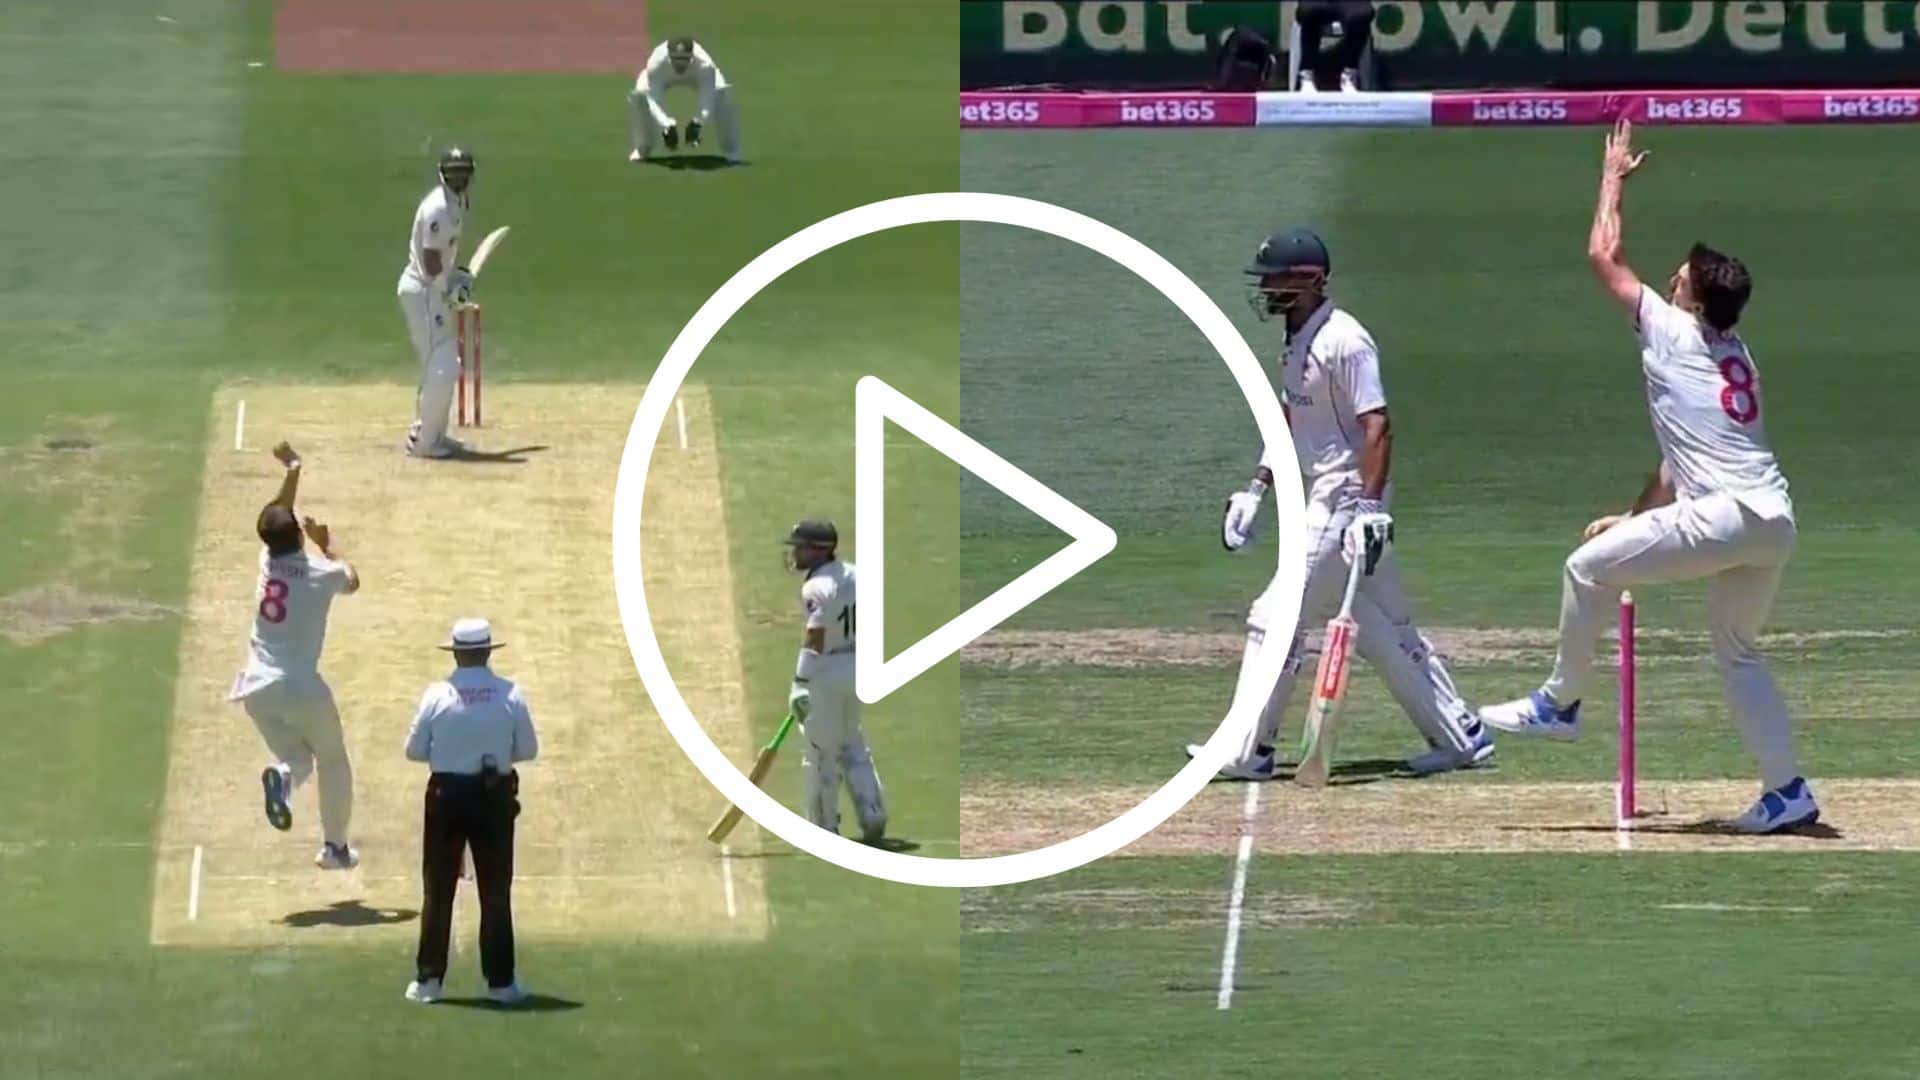 [Watch] Pakistan ‘Robbed’ In Australia As Replay Swaps Masood With Rizwan While No-Ball Check